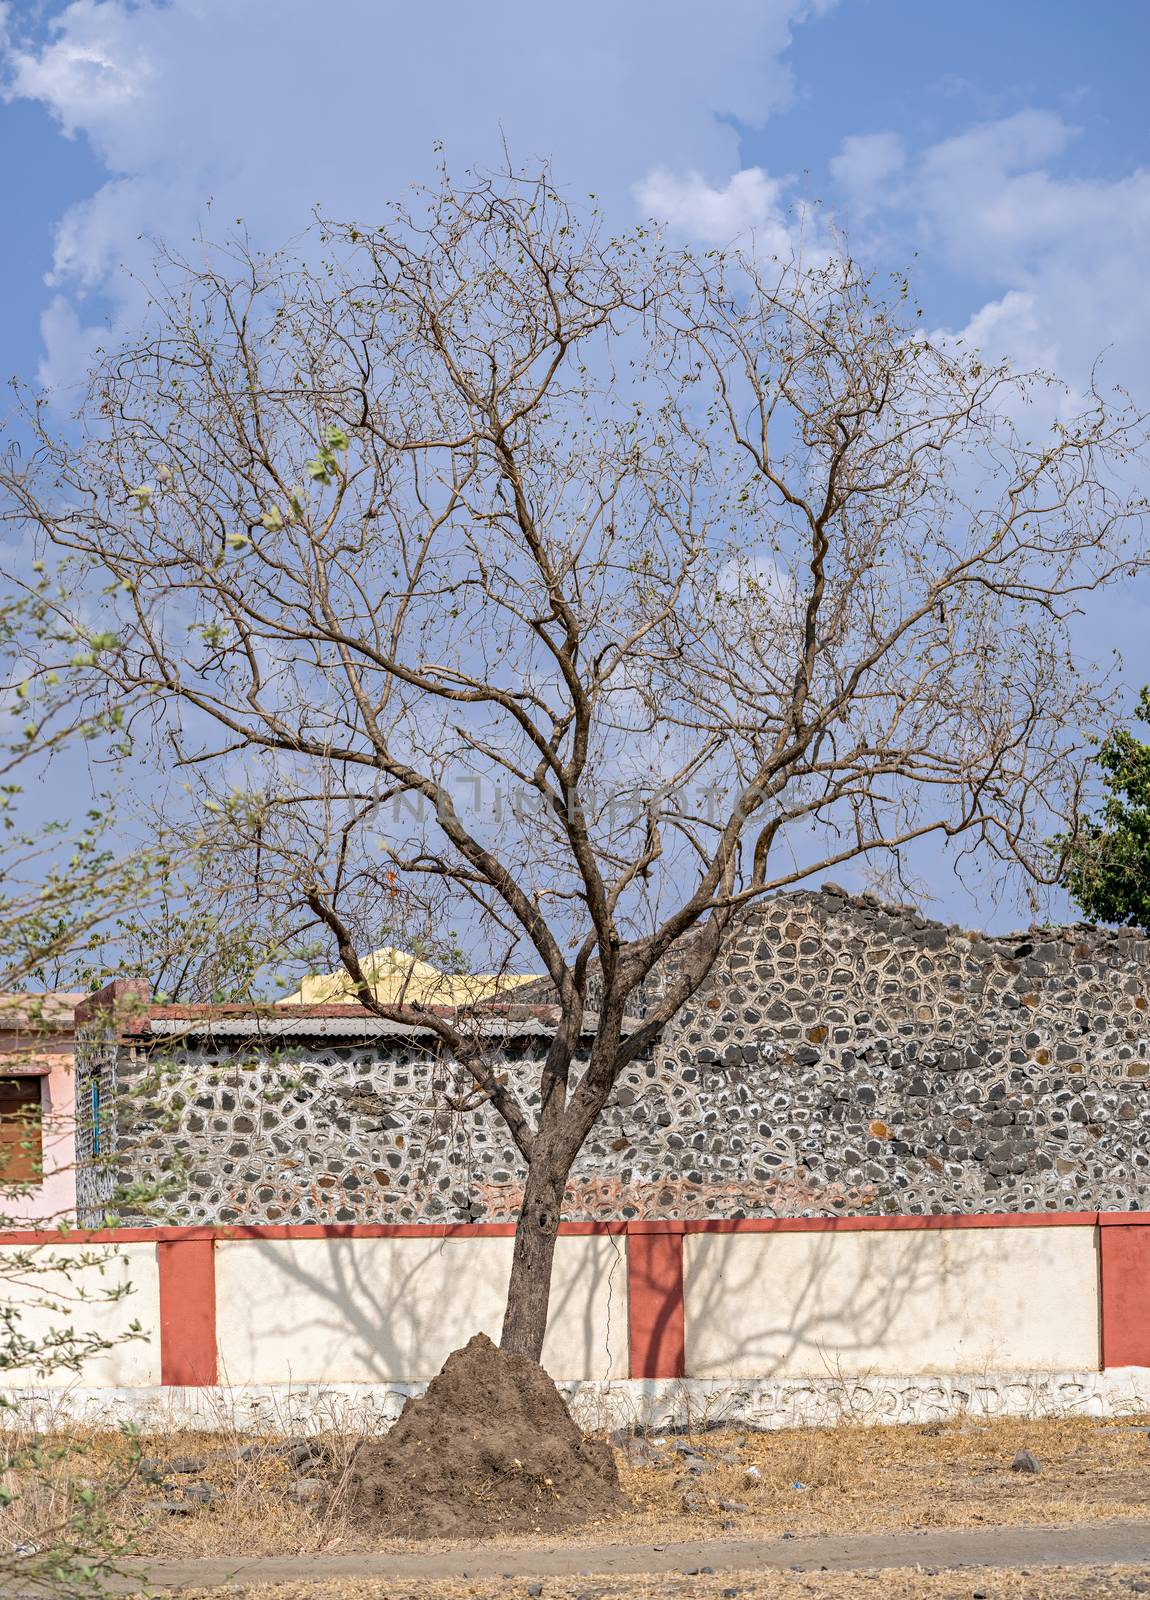 A dry tree and house of ants in village in Pune, Maharashtra, India during summer.